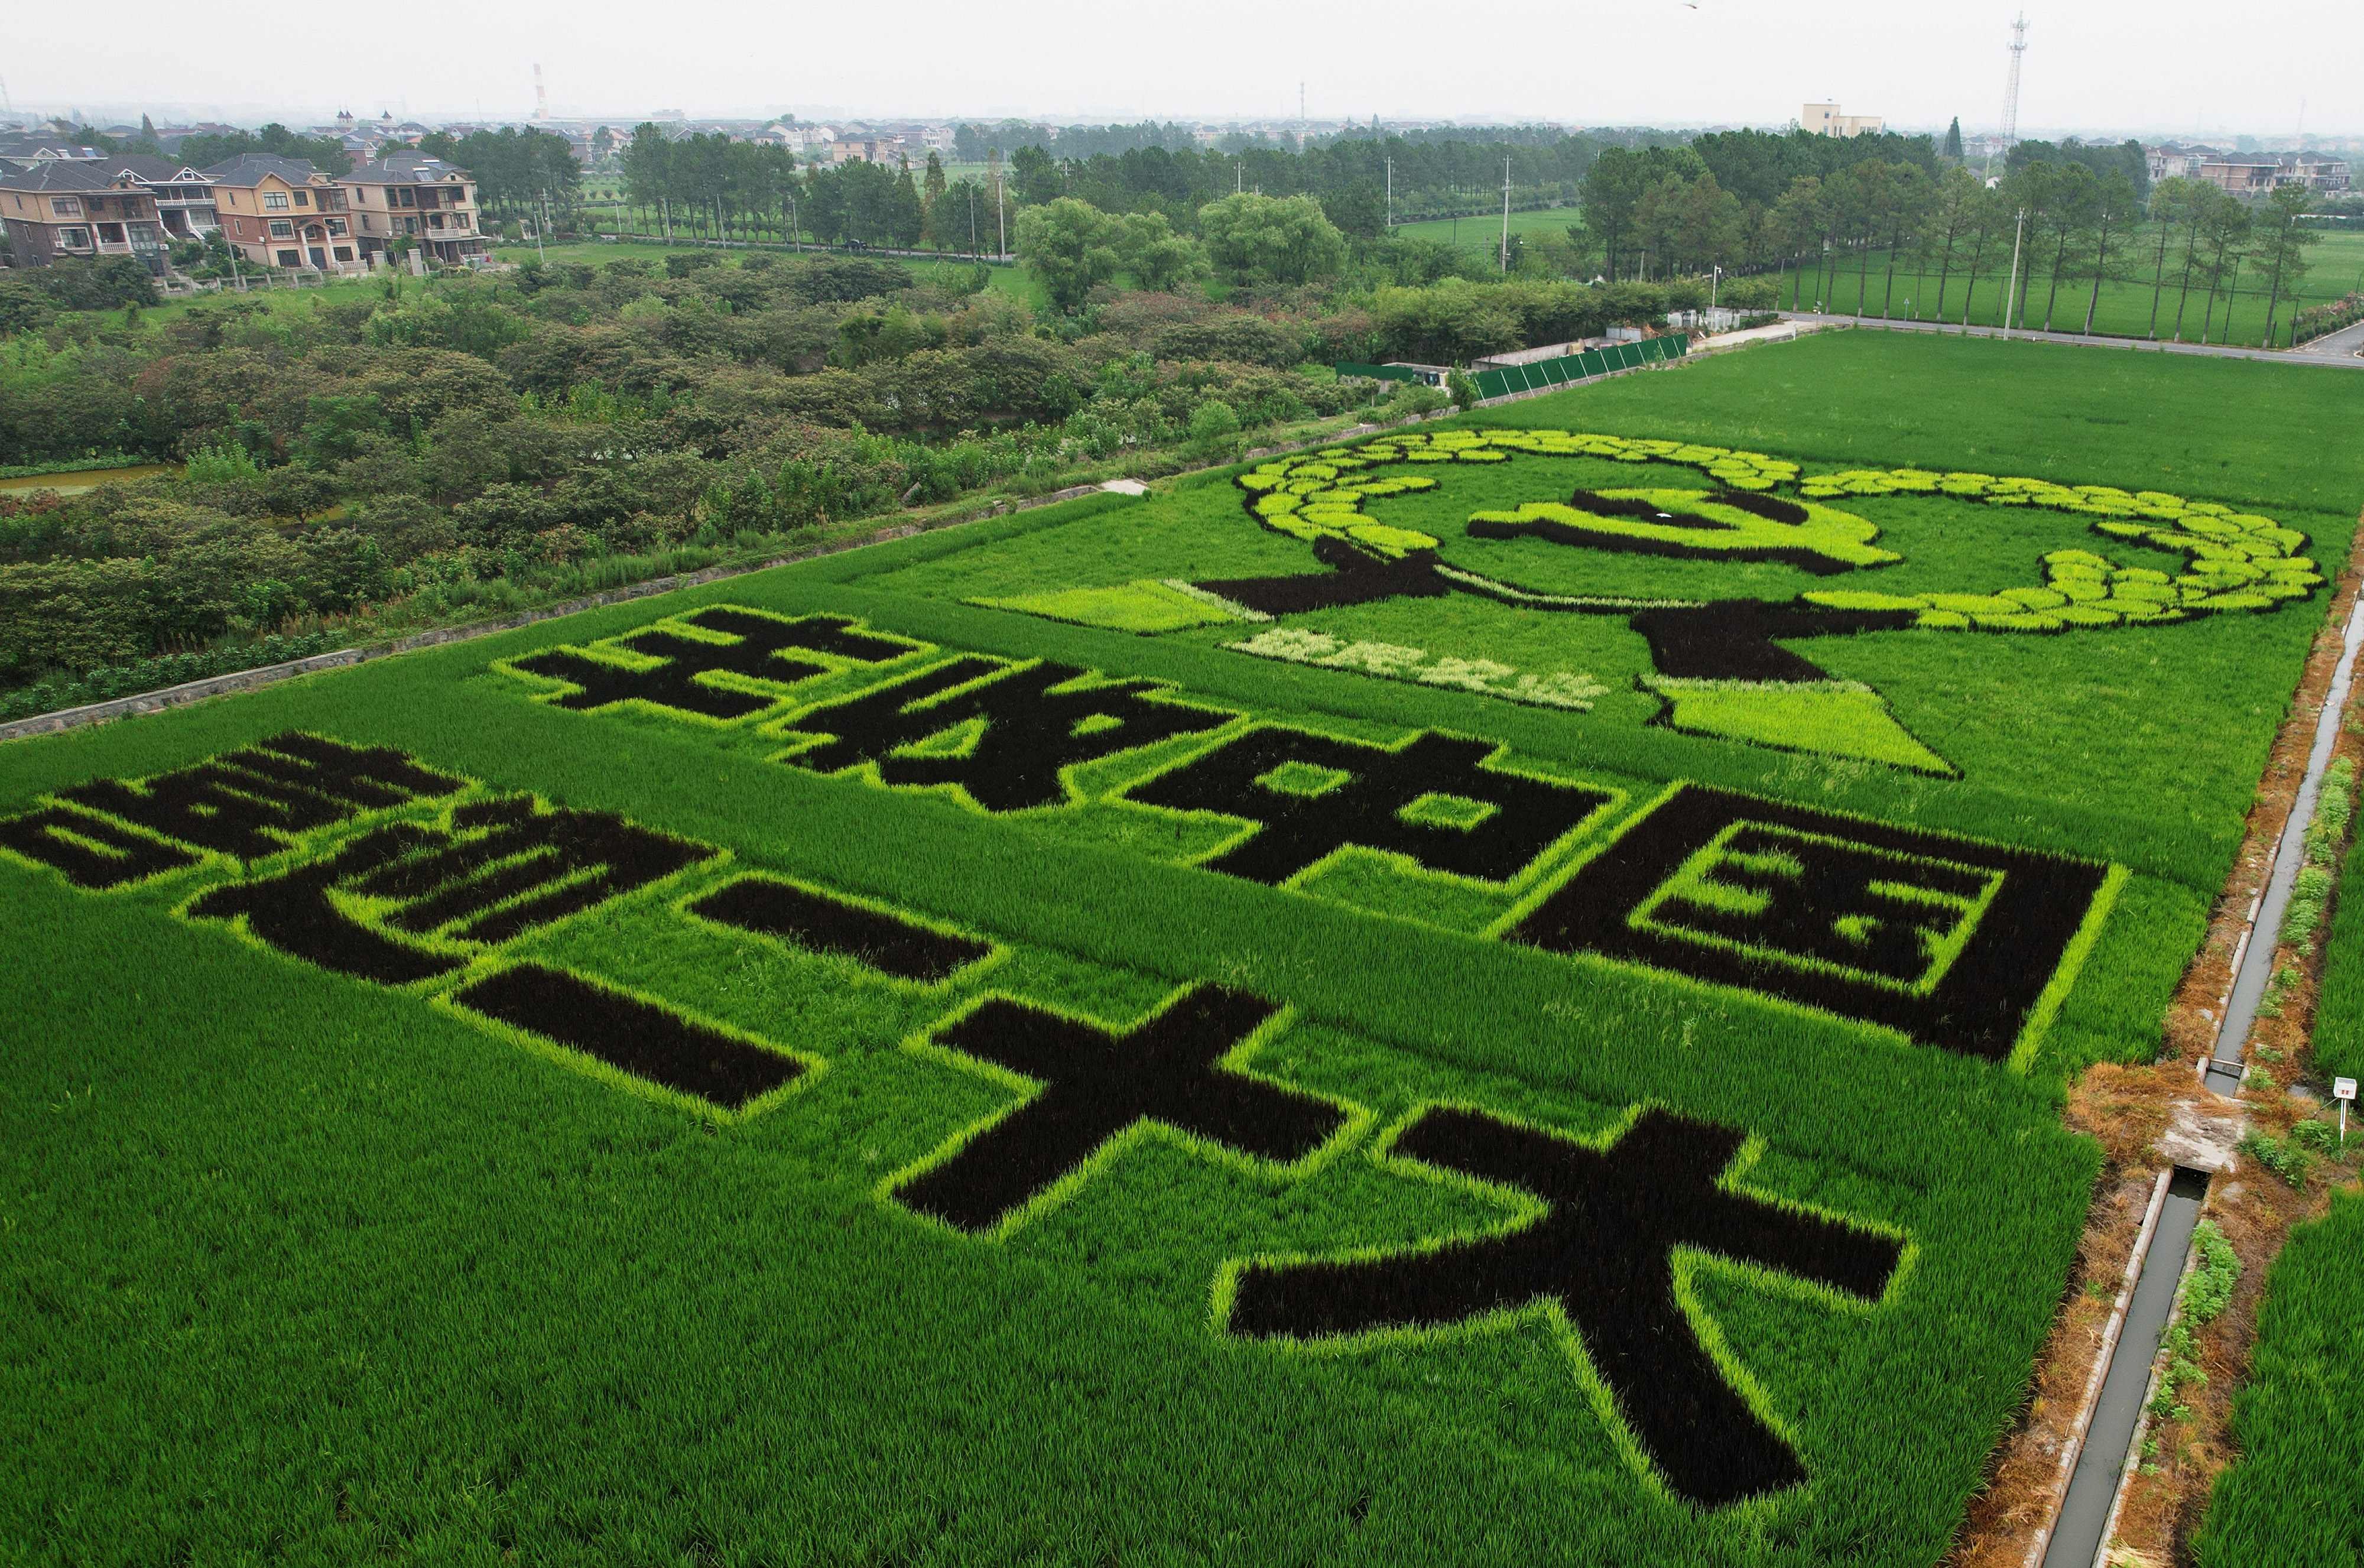 This aerial photo shows an image welcoming the 20th Communist Party Congress, created by growing different varieties of rice, in Hangzhou. State-run media has been proclaiming loyalty to the party ahead of the mid-October event. Photo: AFP 